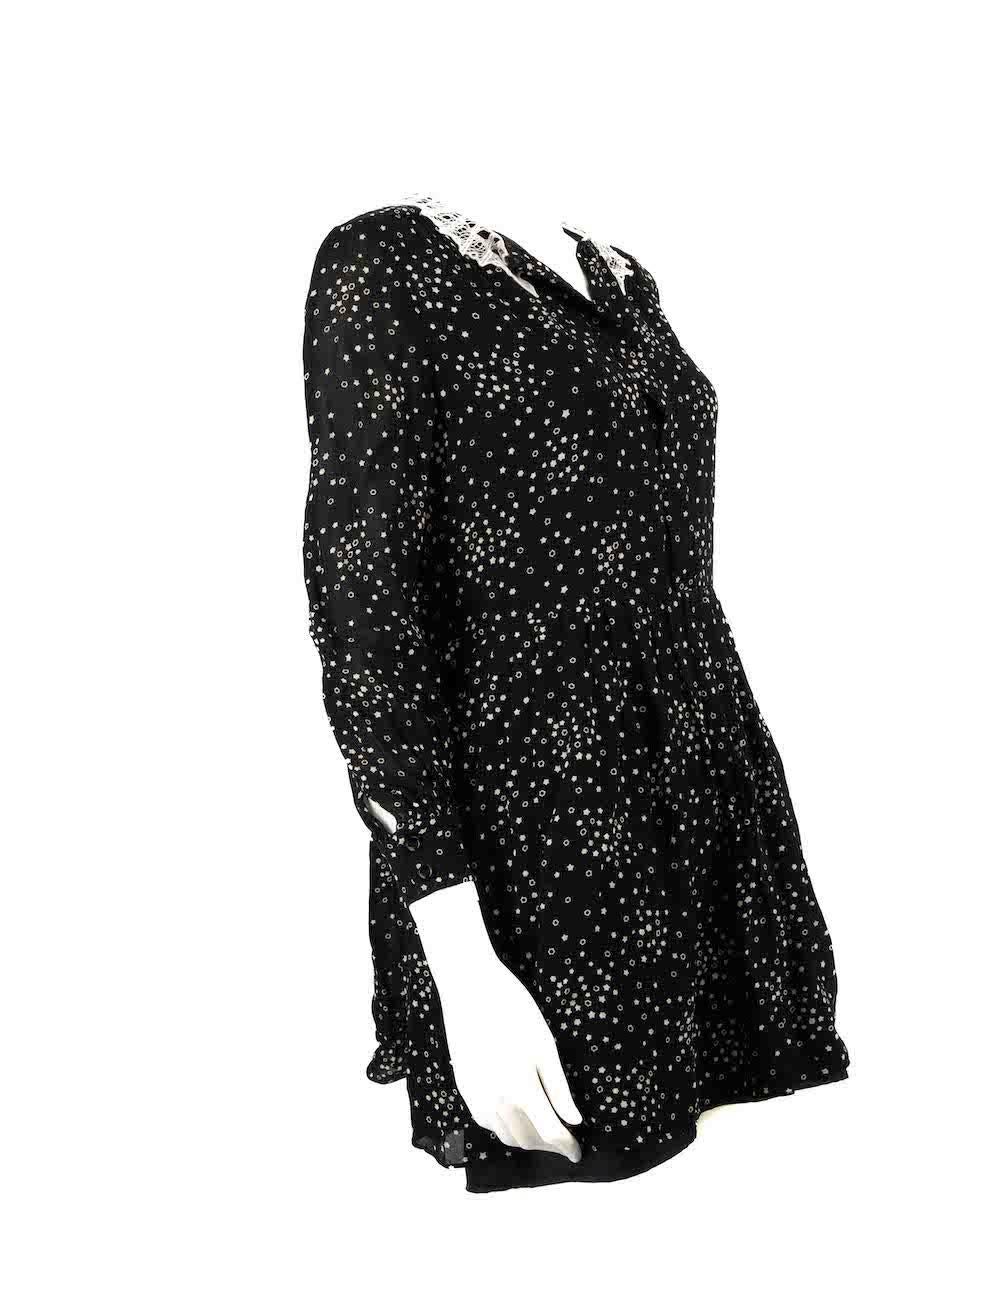 CONDITION is Very good. Minimal wear to dress is evident. Minimal wear to the lace collar where a handful of light discoloured marks are found over the left shoulder on this used Saint Laurent designer resale item.
 
 
 
 Details
 
 
 Black
 
